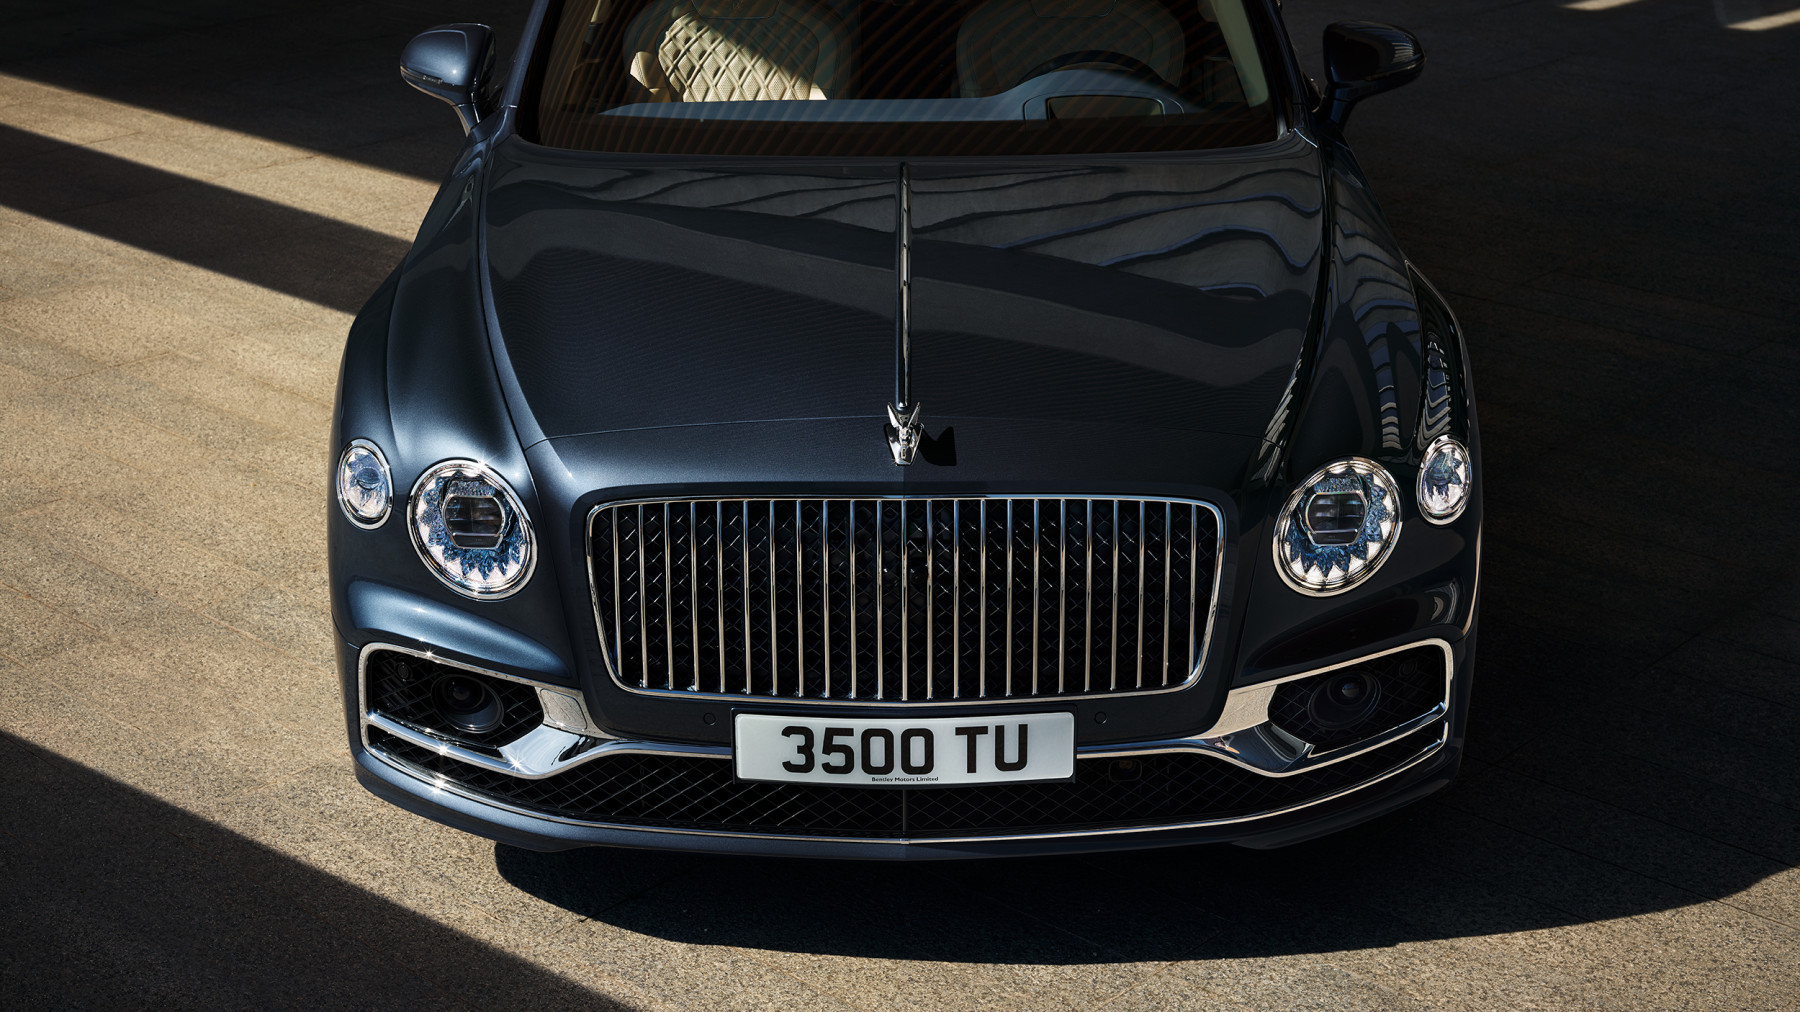 The new Bentley Flying Spur 1